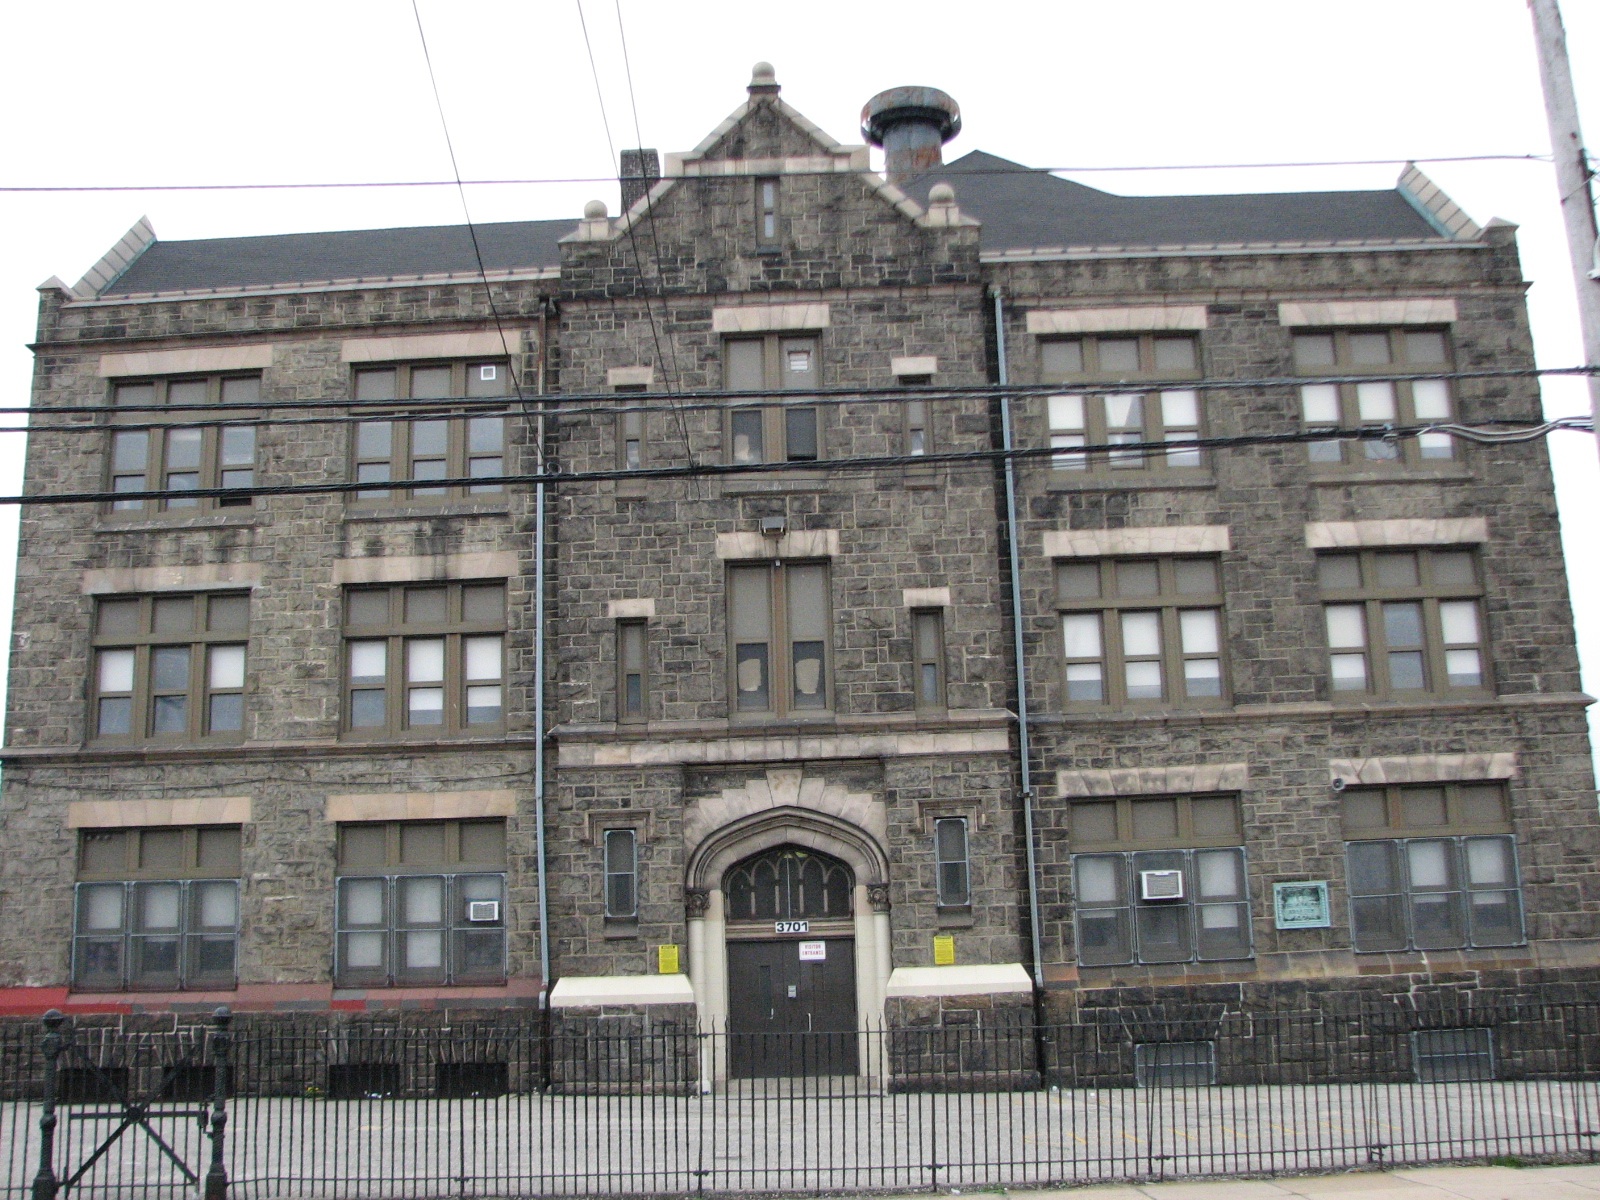 The front of Sheridan West Academy, on Frankford Avenue at Castor.